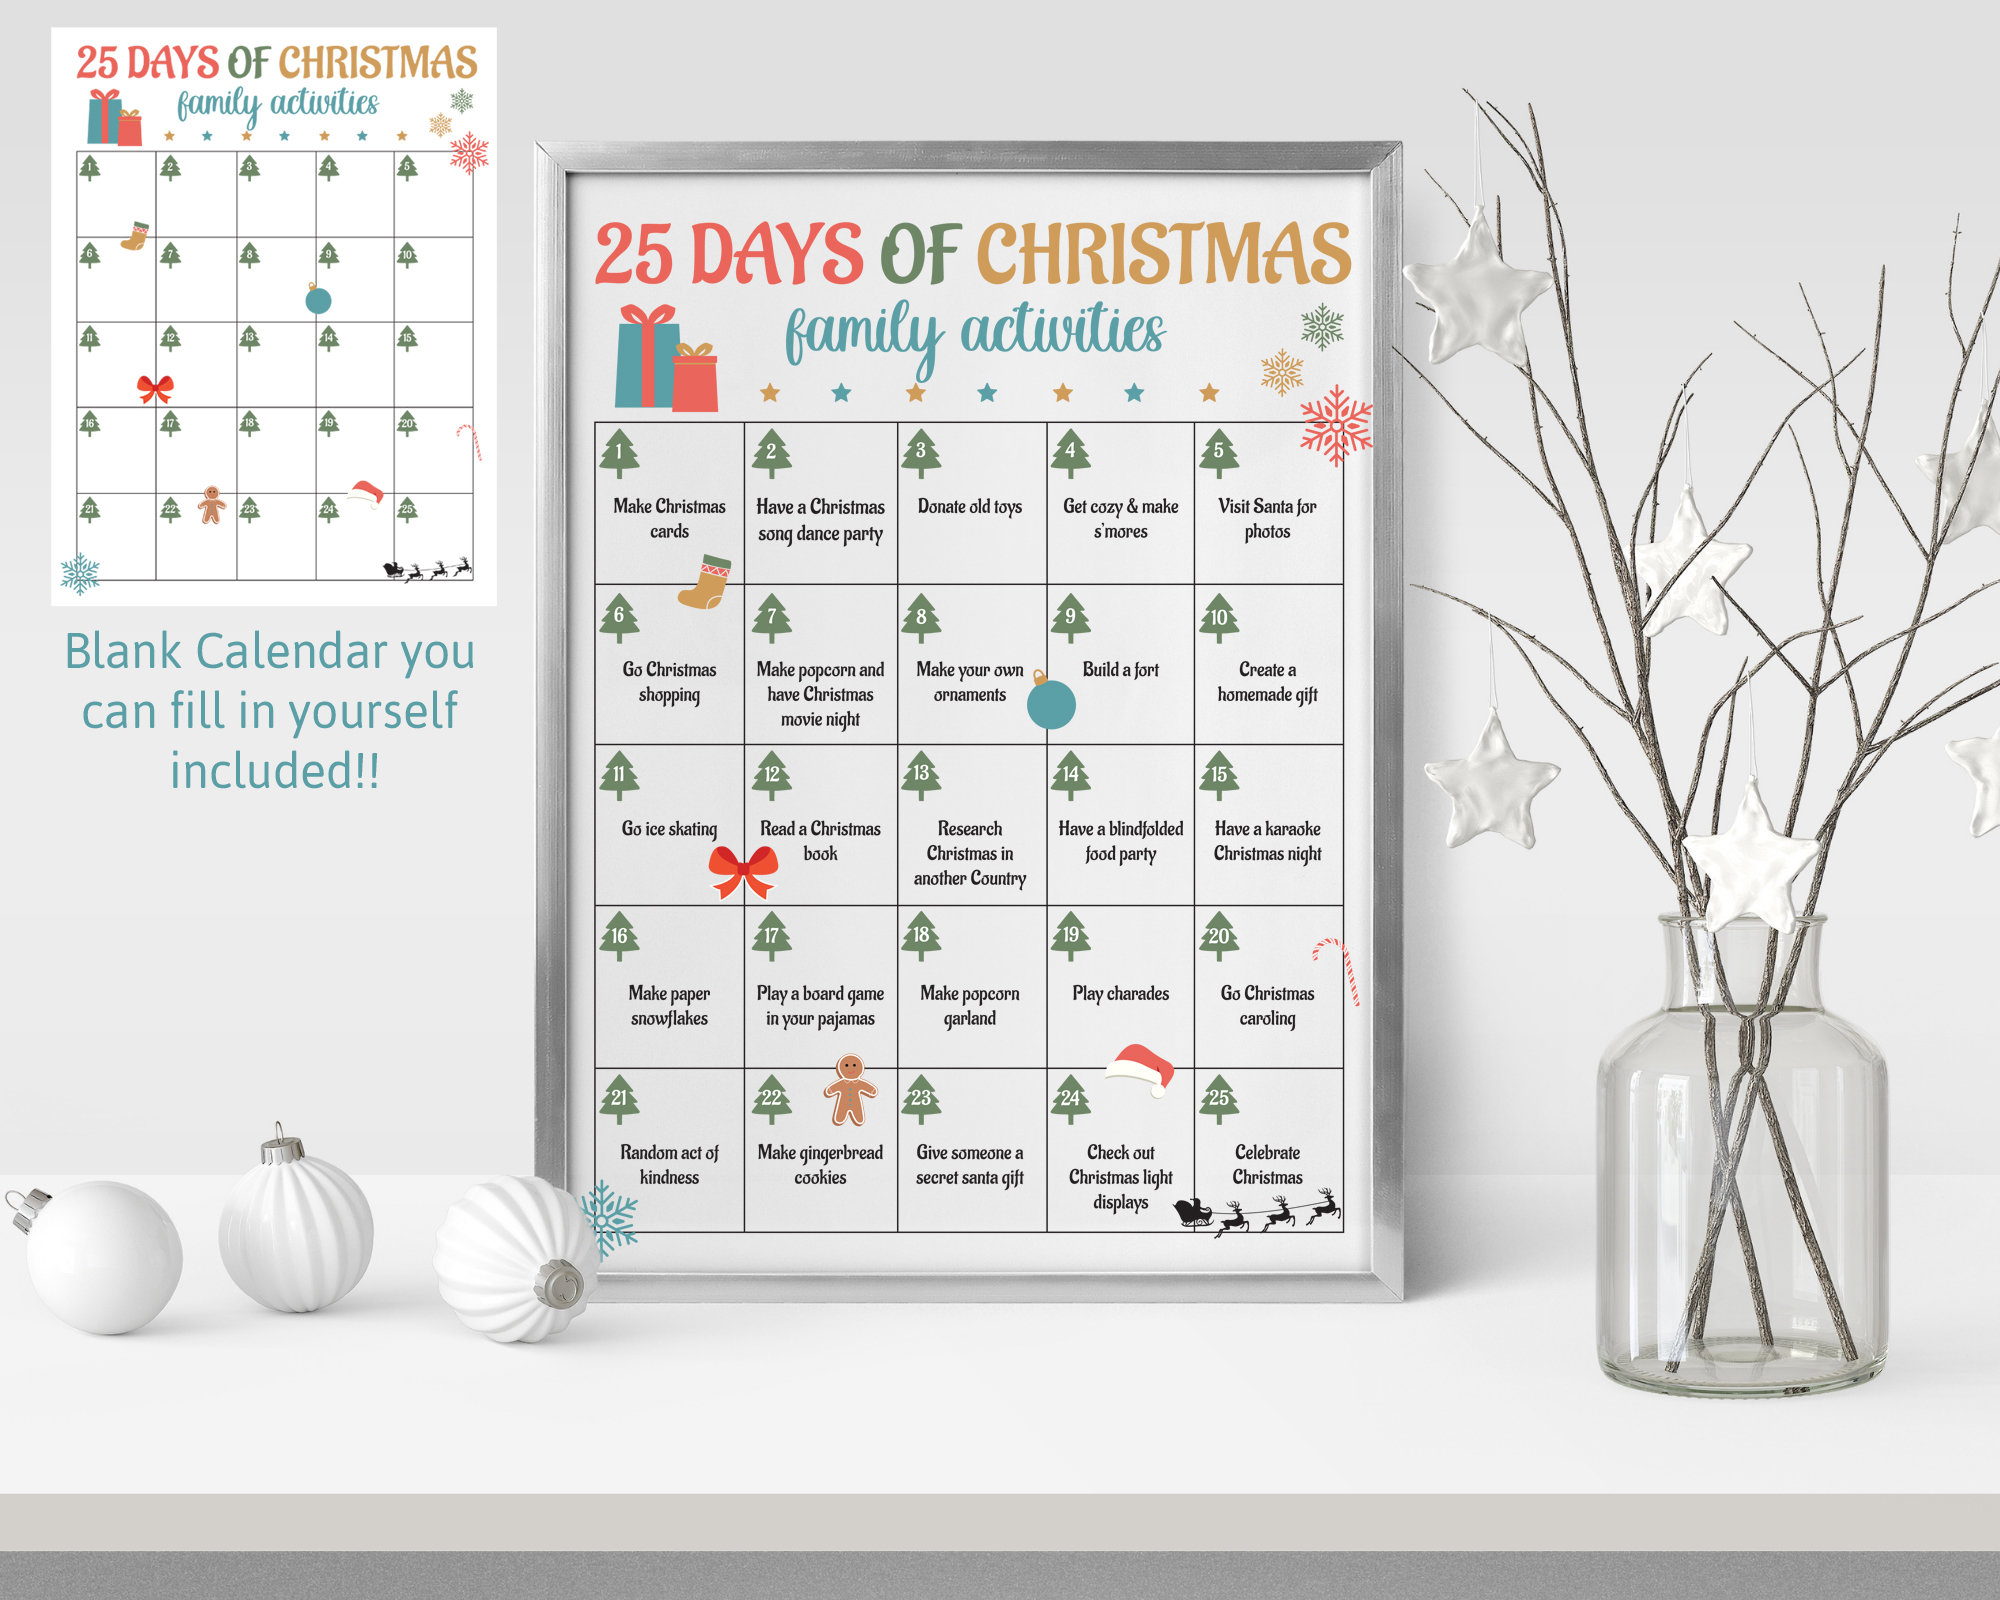 25 advent calendars to count down to Christmas - Our Tiny Nest